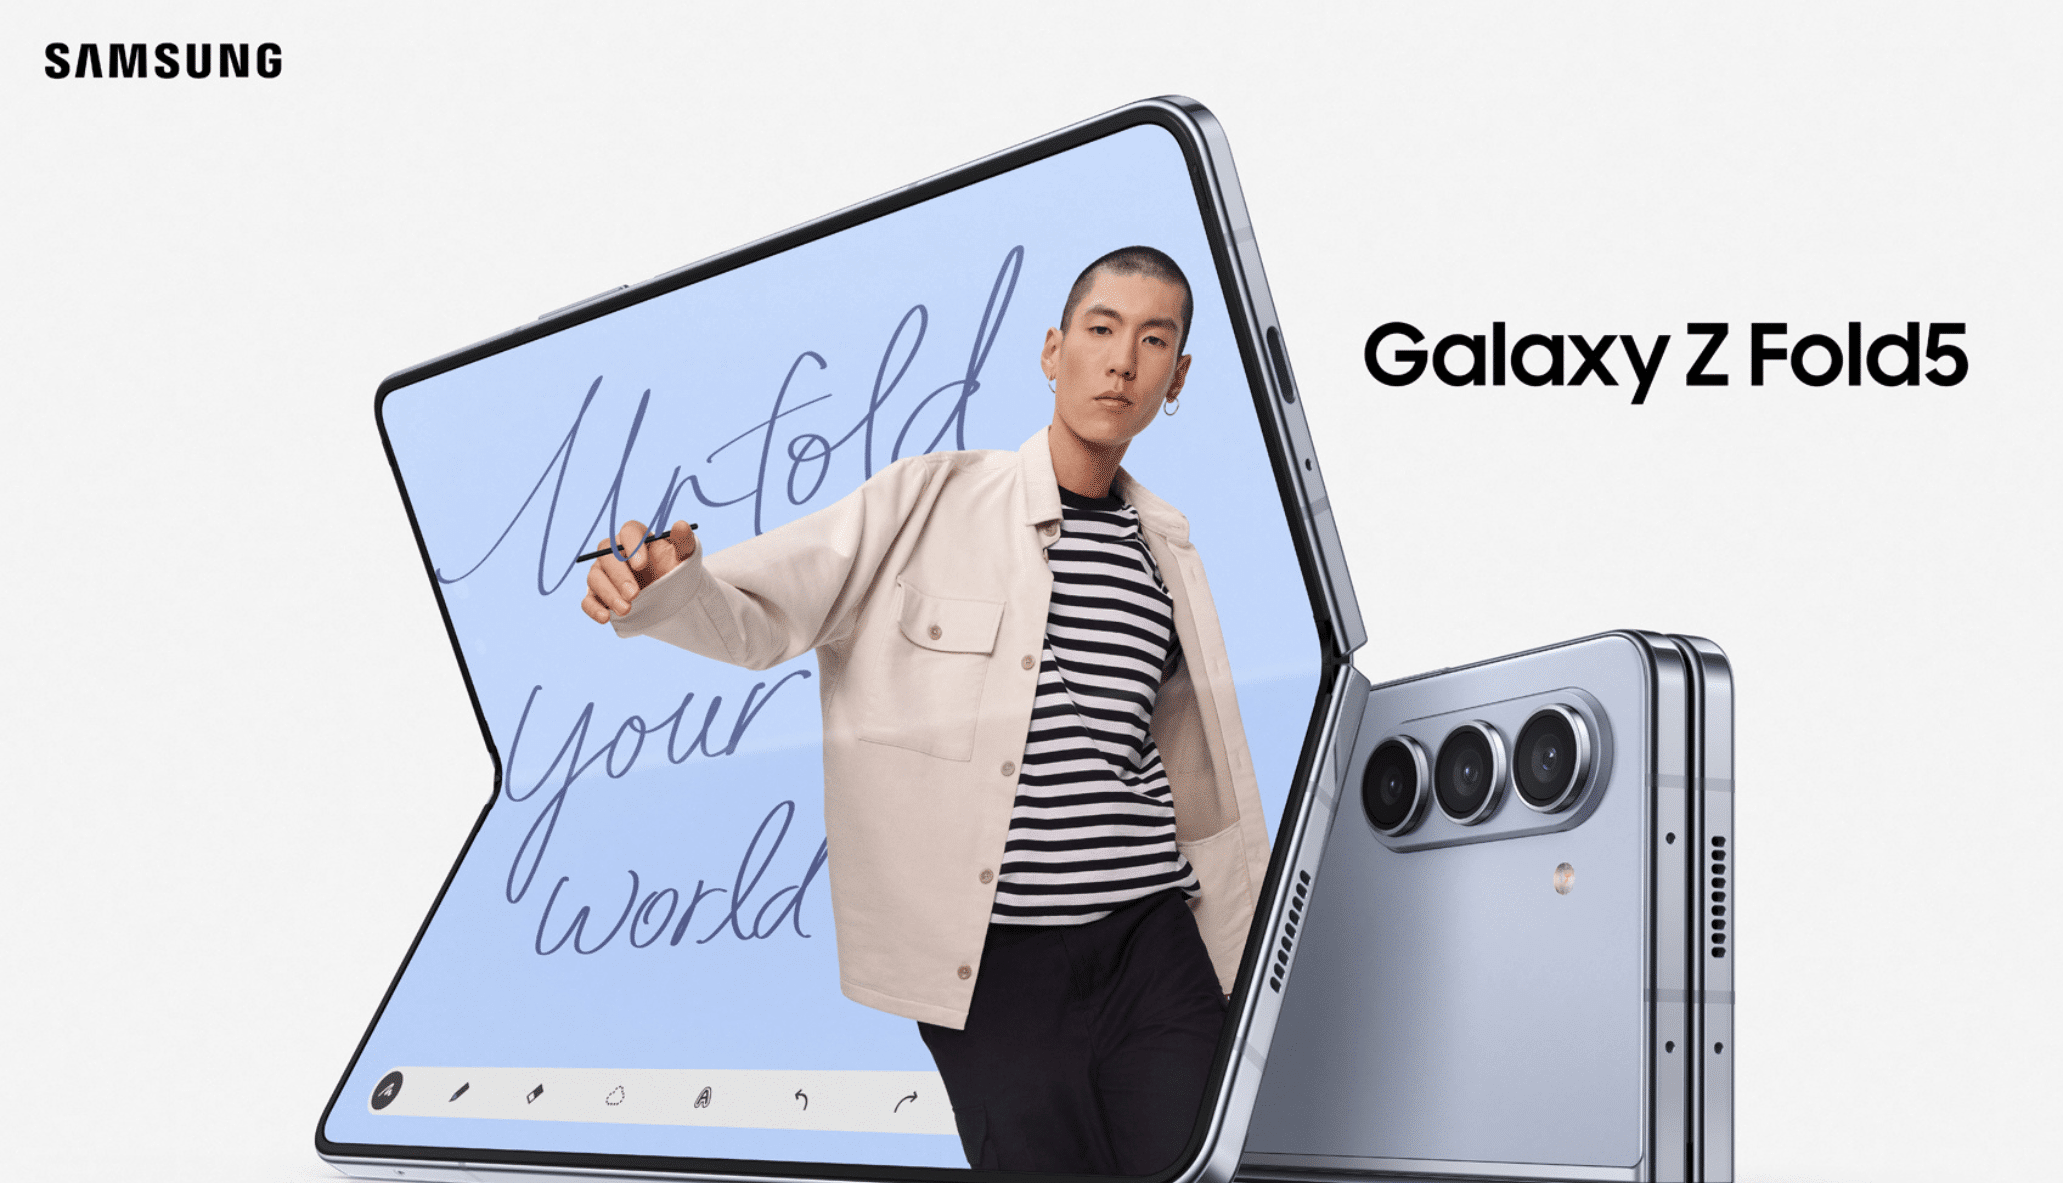 Samsung Introduces Galaxy Z Flip5 And Galaxy Z Fold5 During Unpacked Event-Markedium